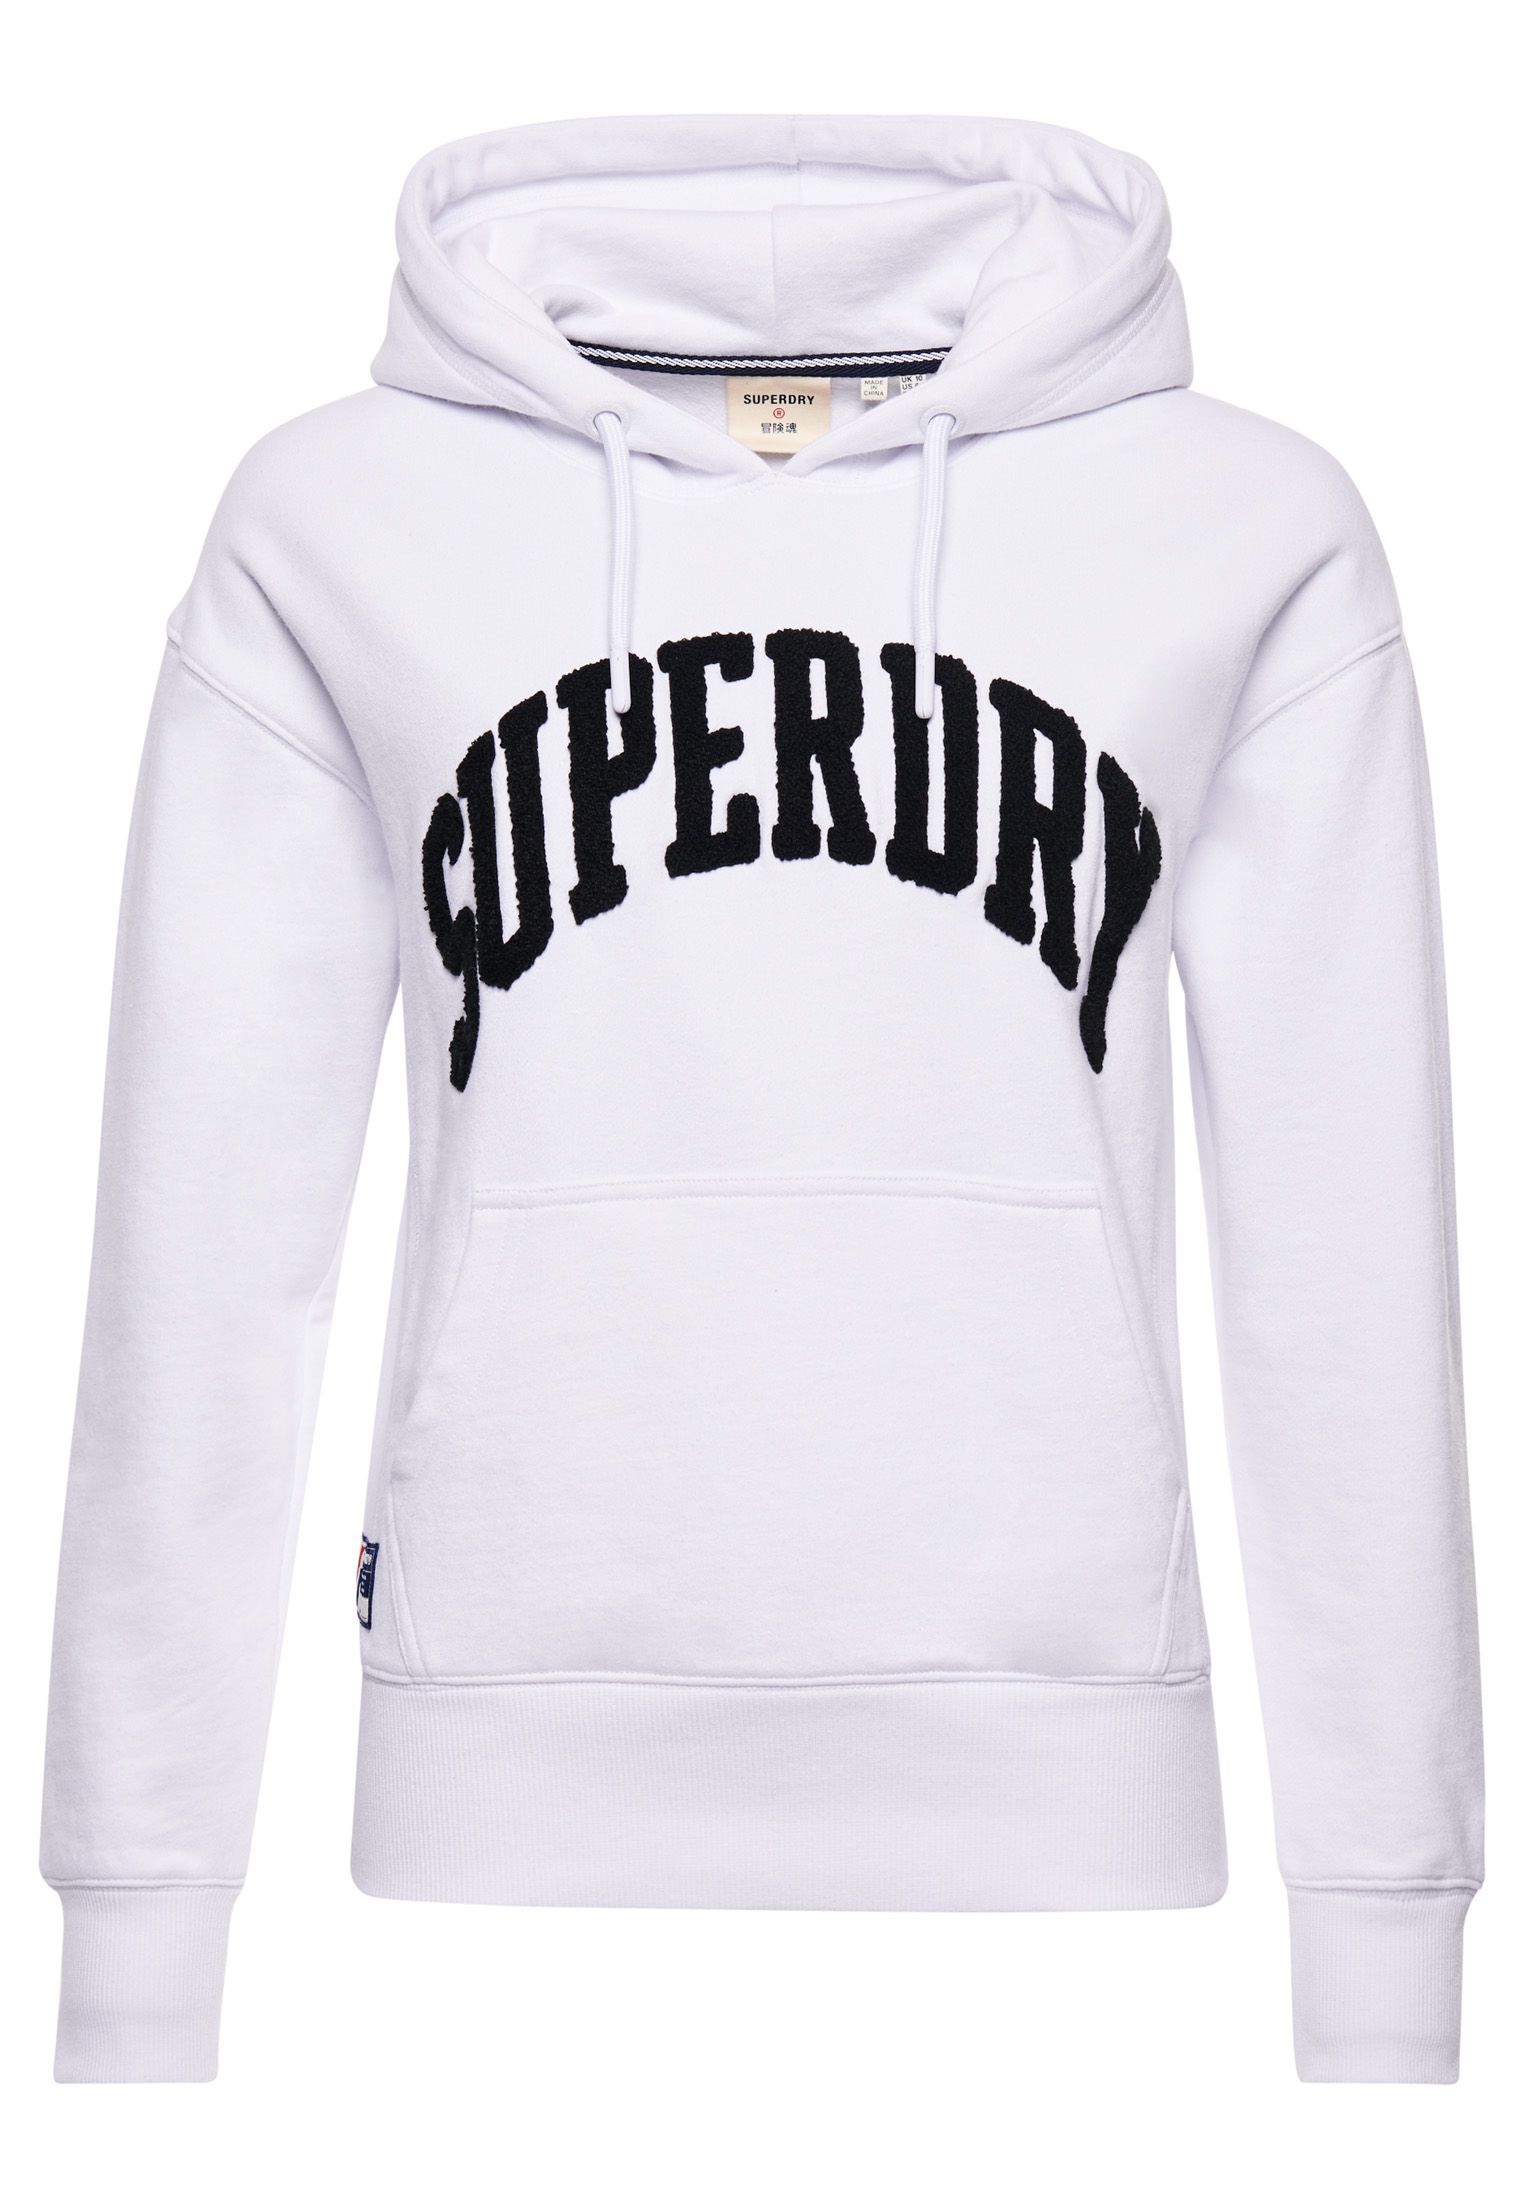 Whether you're looking for a chilled look, or a sporty vibe, we've got you covered with the Varsity Arch Mono Hoodie.Relaxed fit – the classic Superdry fit. Not too slim, not too loose, just right. Go for your normal sizeLong sleevesEmbroidered graphicFront pouch pocketDrawstring hoodRibbed cuffs and hemSignature logo patch